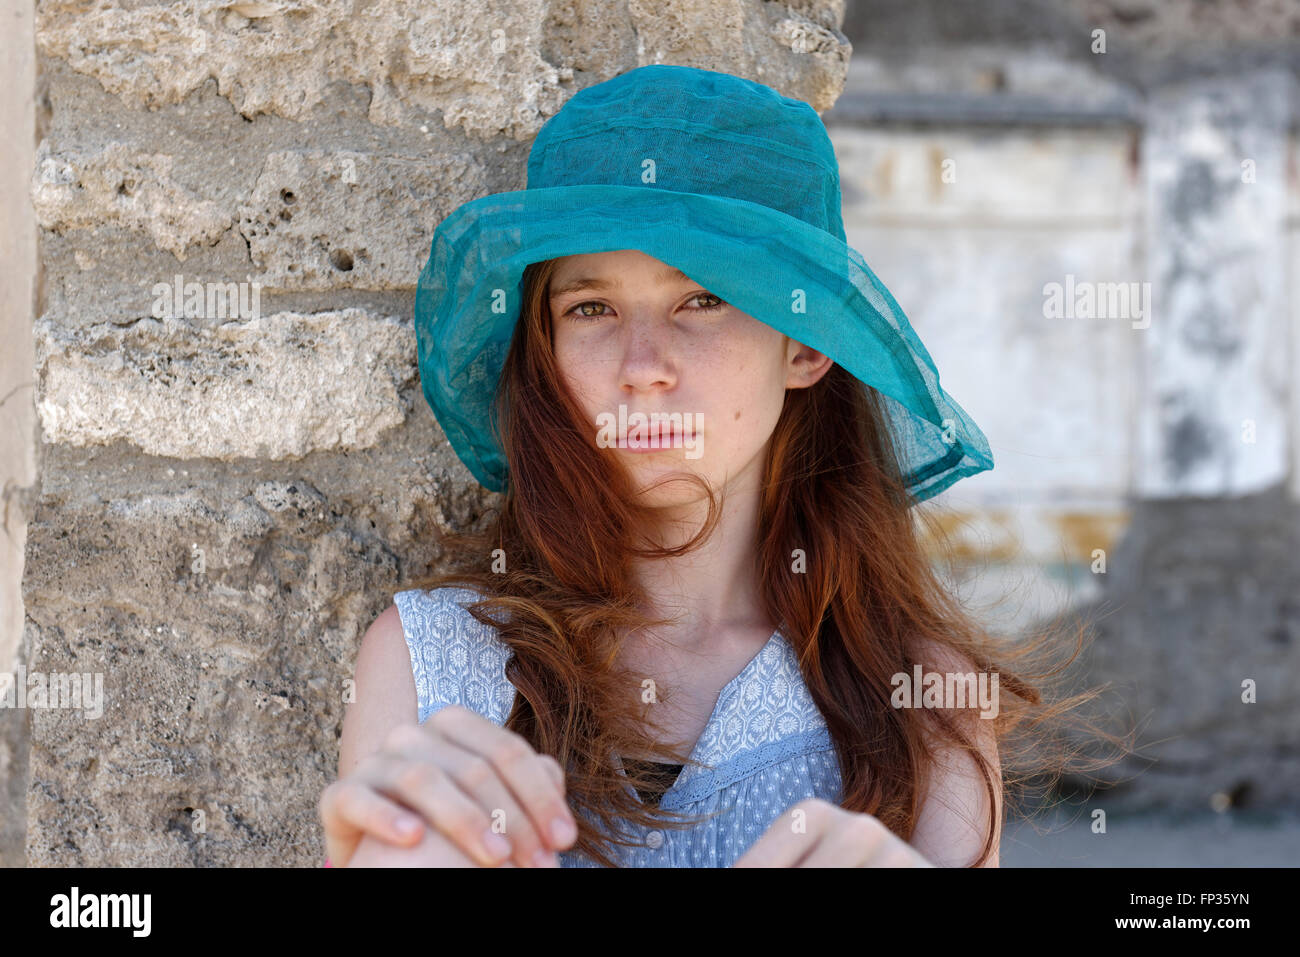 Red-haired girl with a turquoise sun hat looking seriously, portrait, Italy Stock Photo